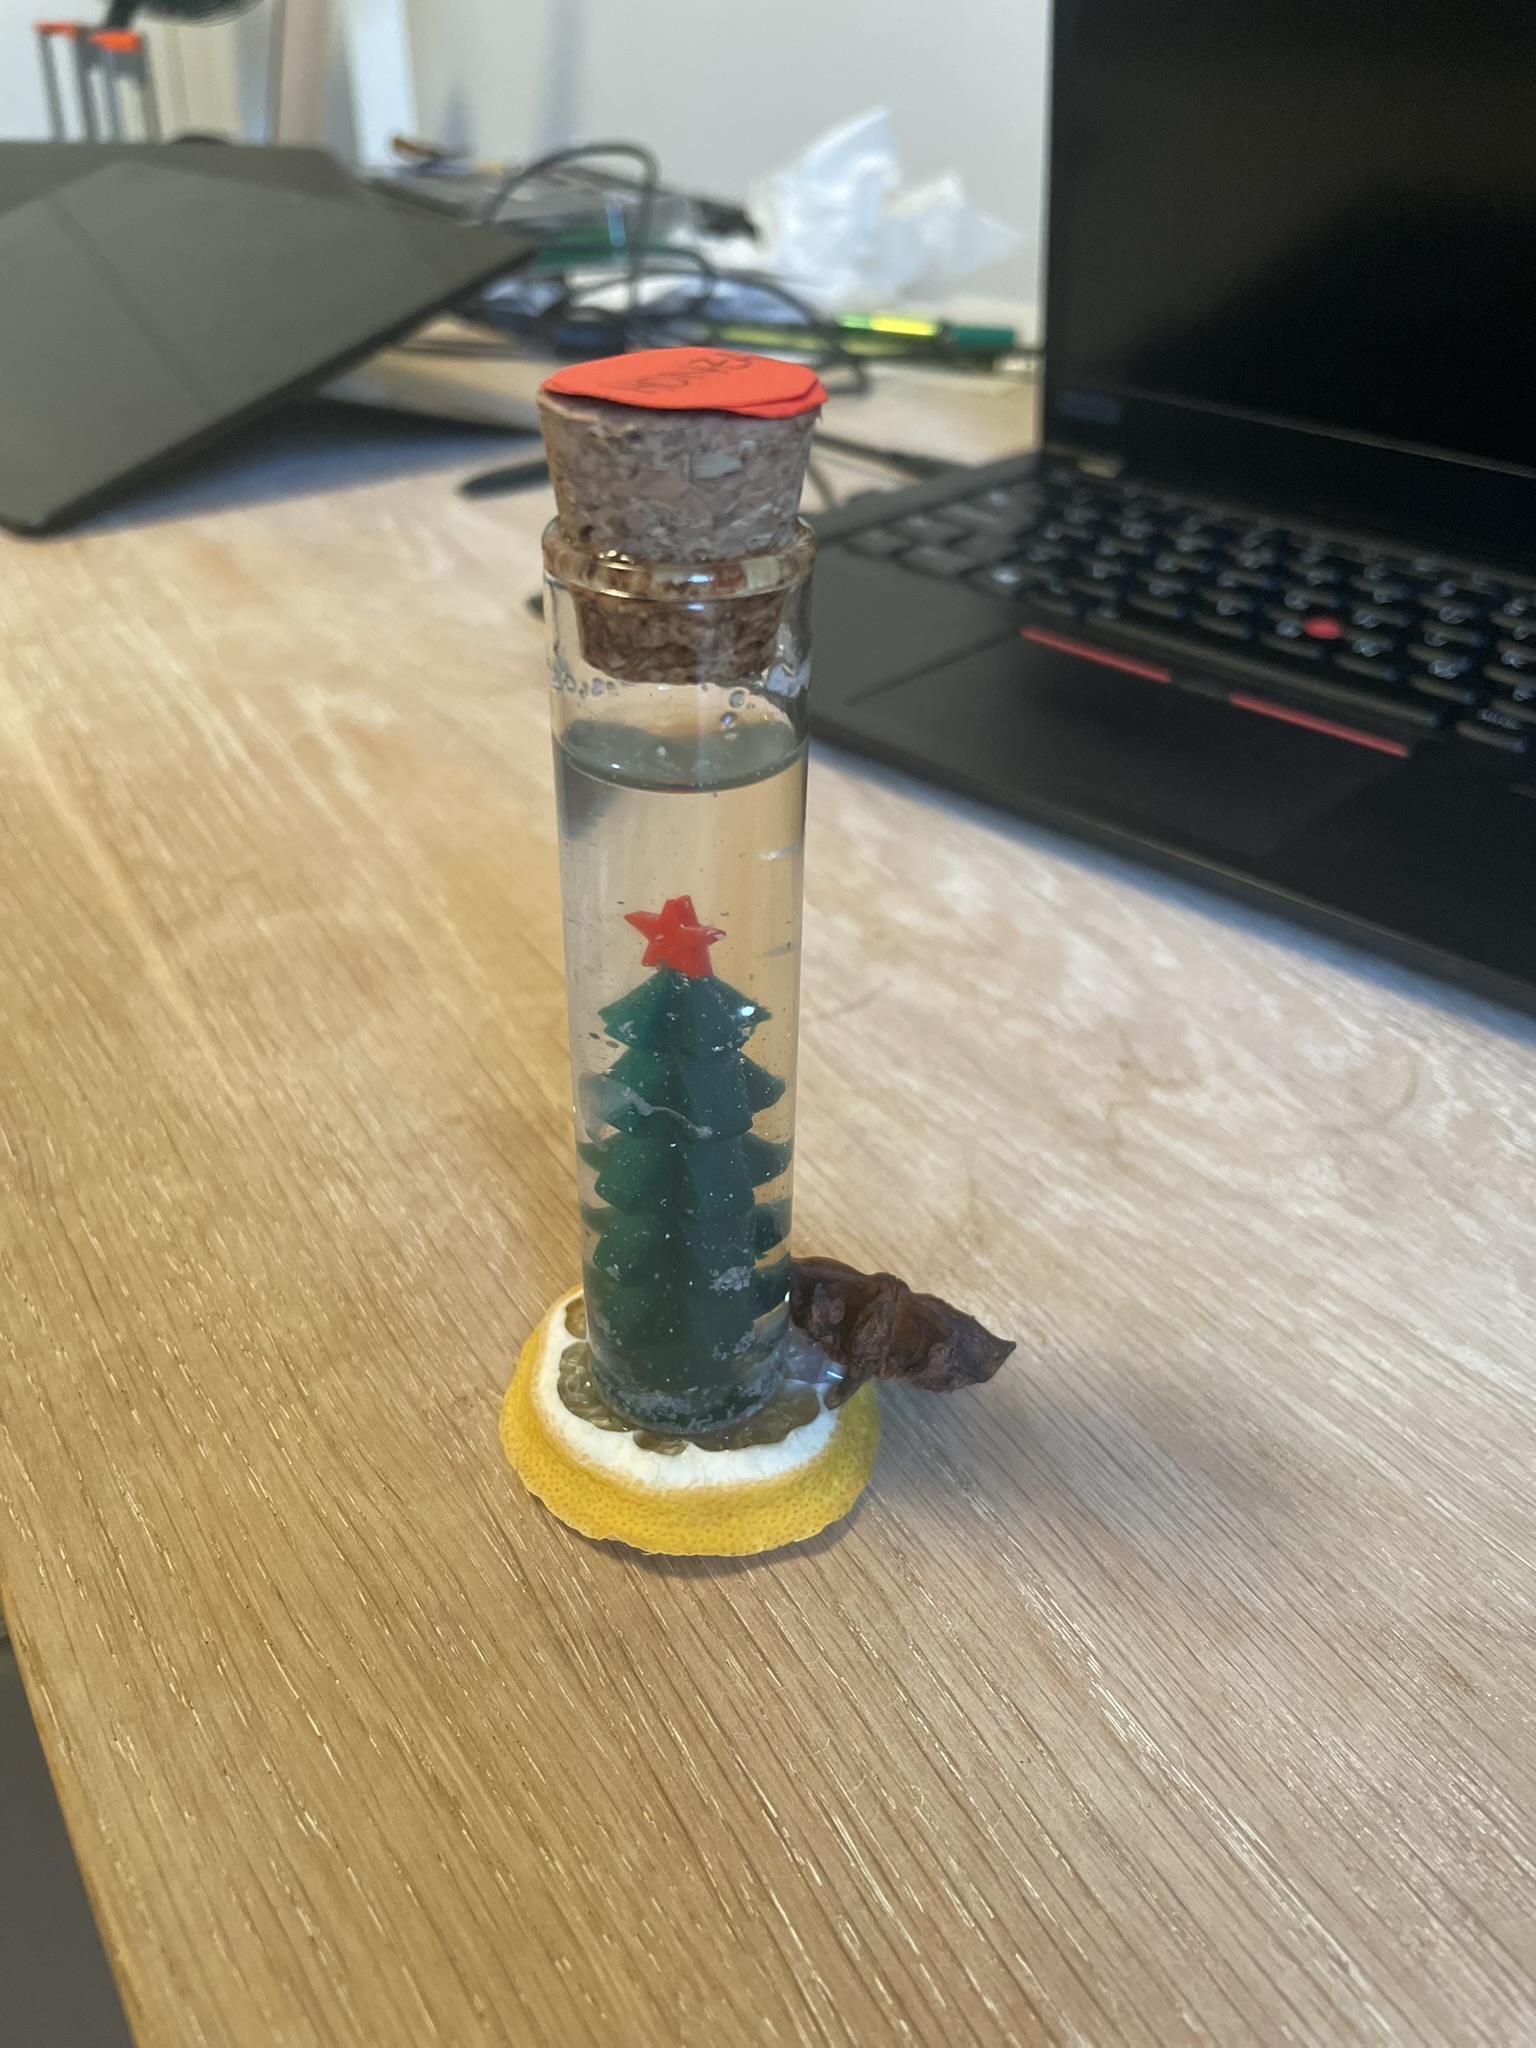 A Snowglobe with Christmas tree